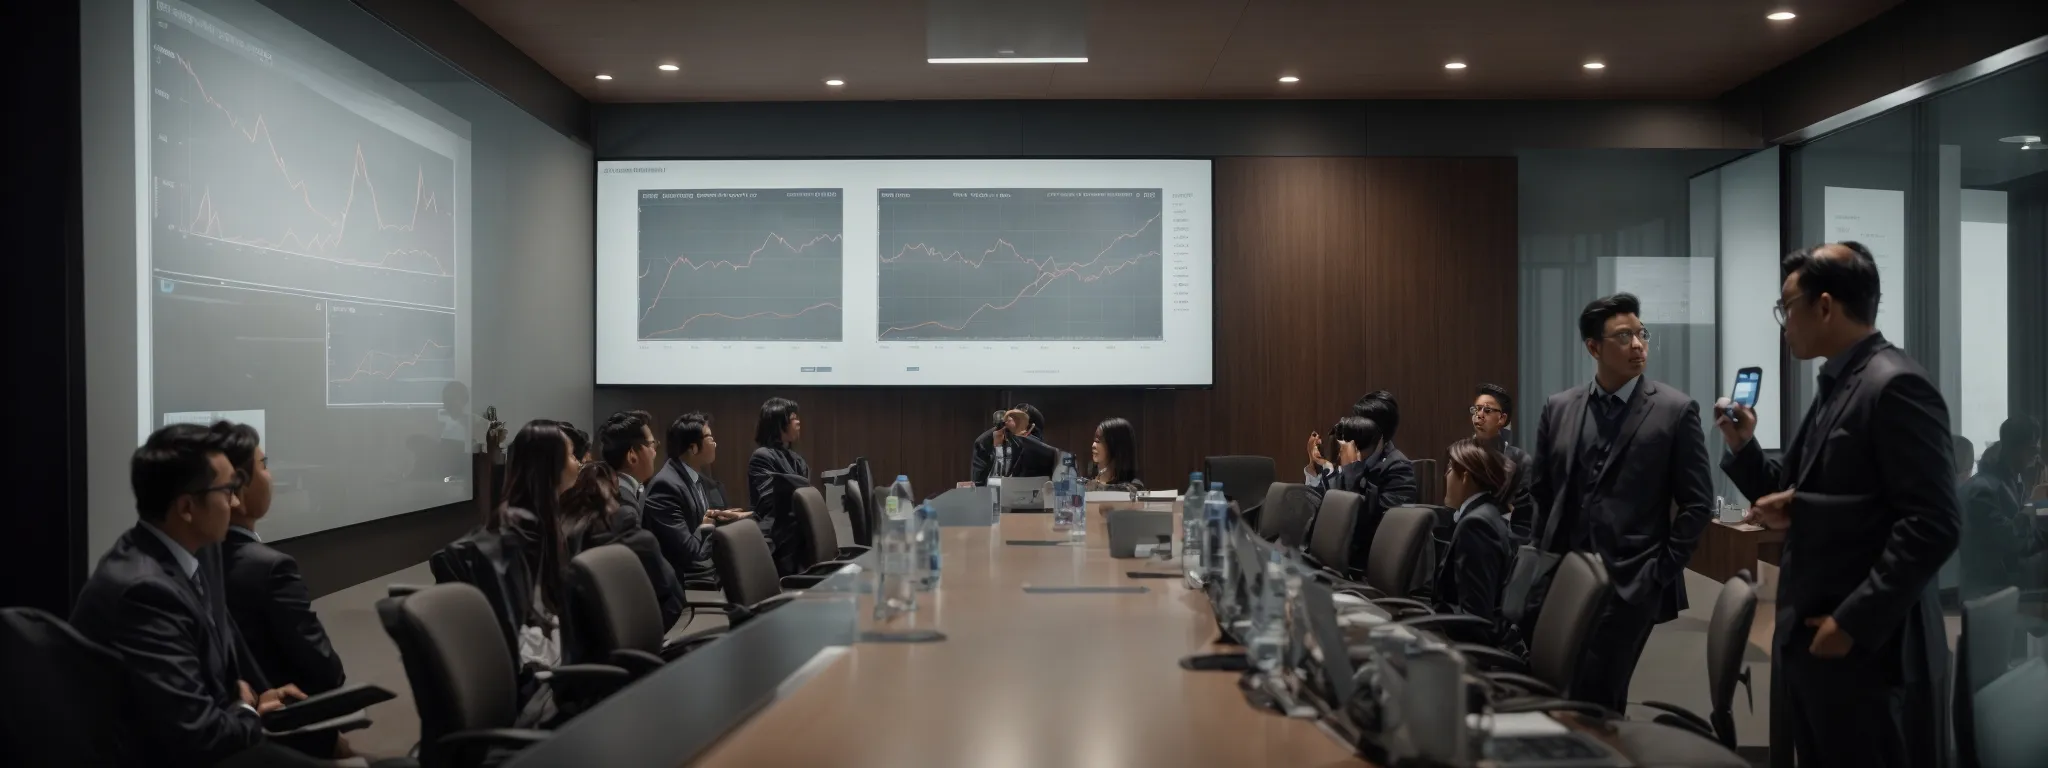 a conference room with a large screen displaying graphs and a lecturer pointing to the digital marketing trends.